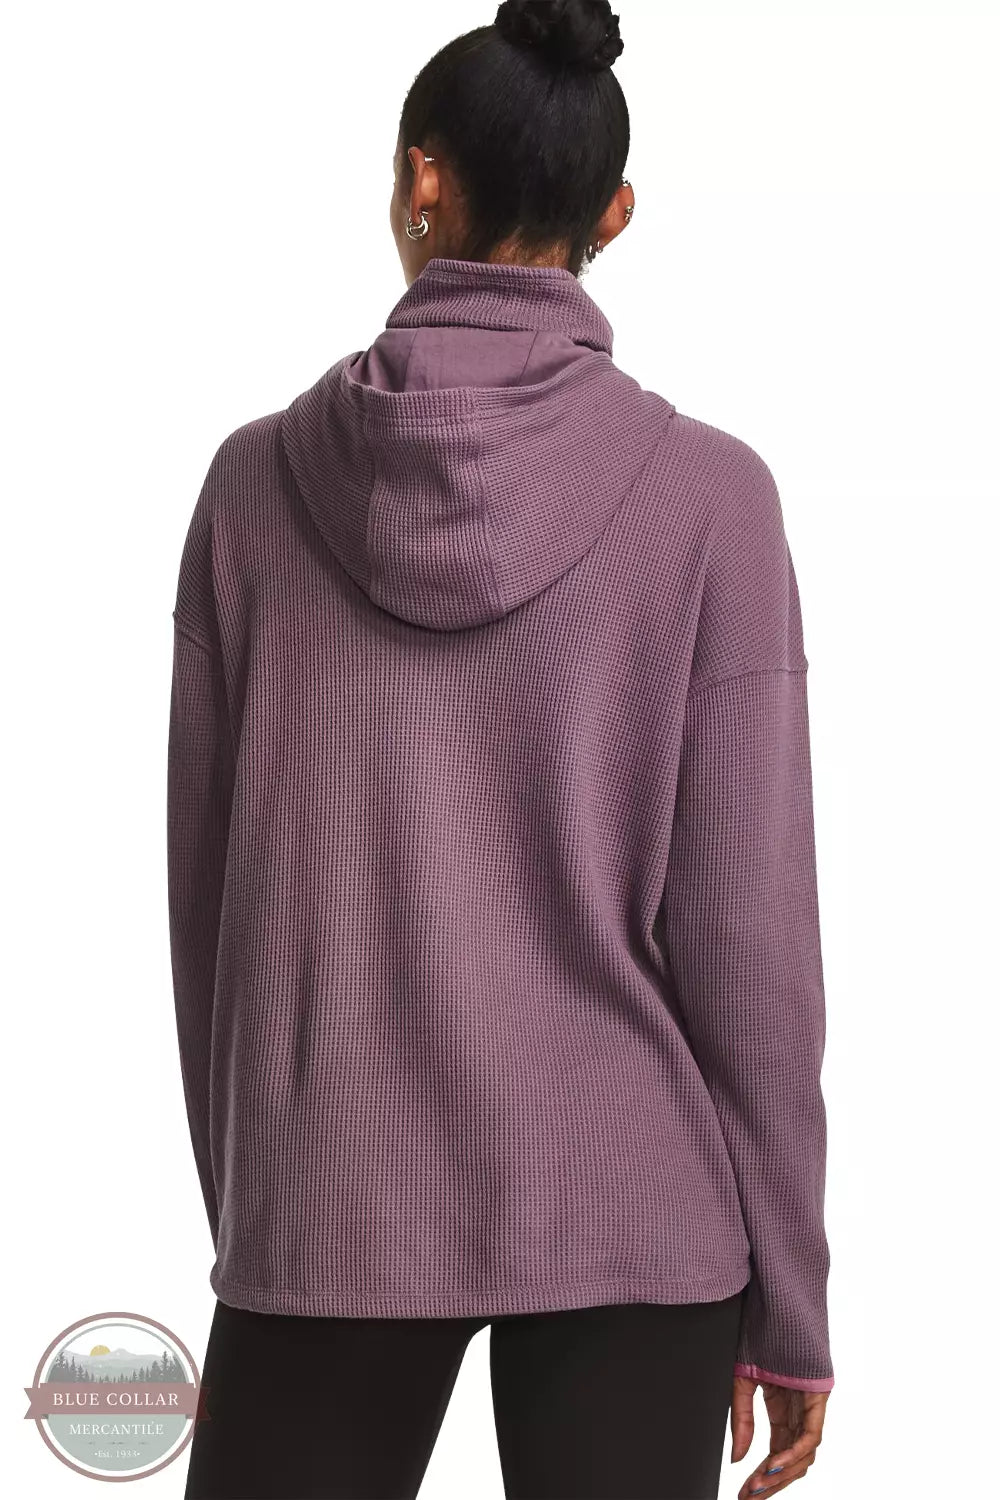 Under Armour 1373286 Waffle Funnel Hoodie Misty Purple Back View